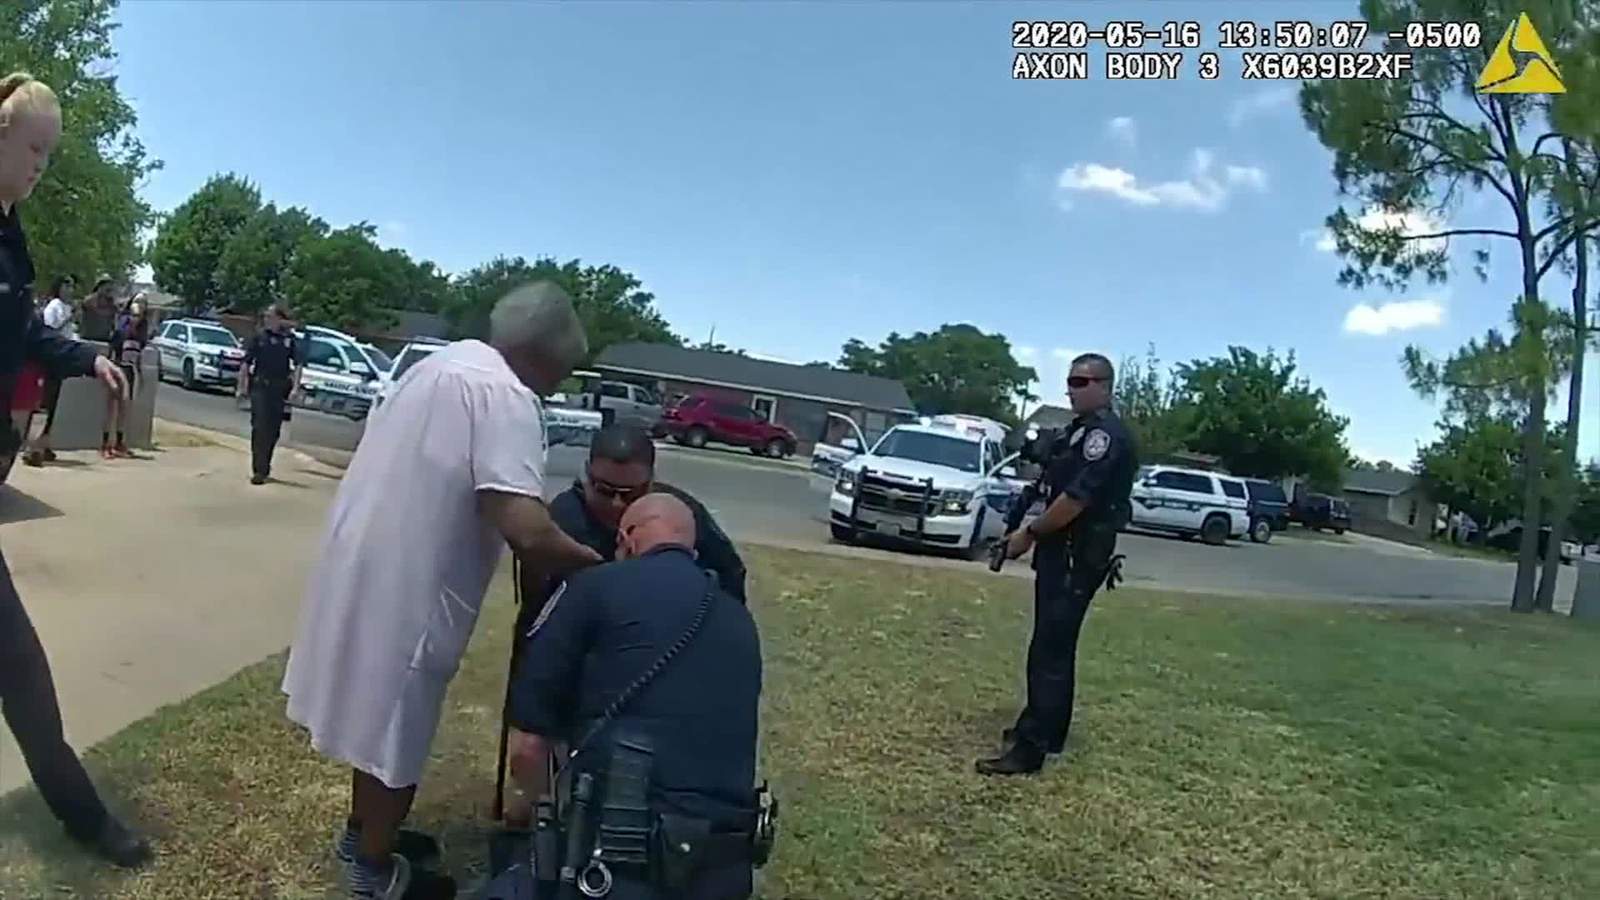 90-year-old grandma tries to defuse tense confrontation between police and her grandson